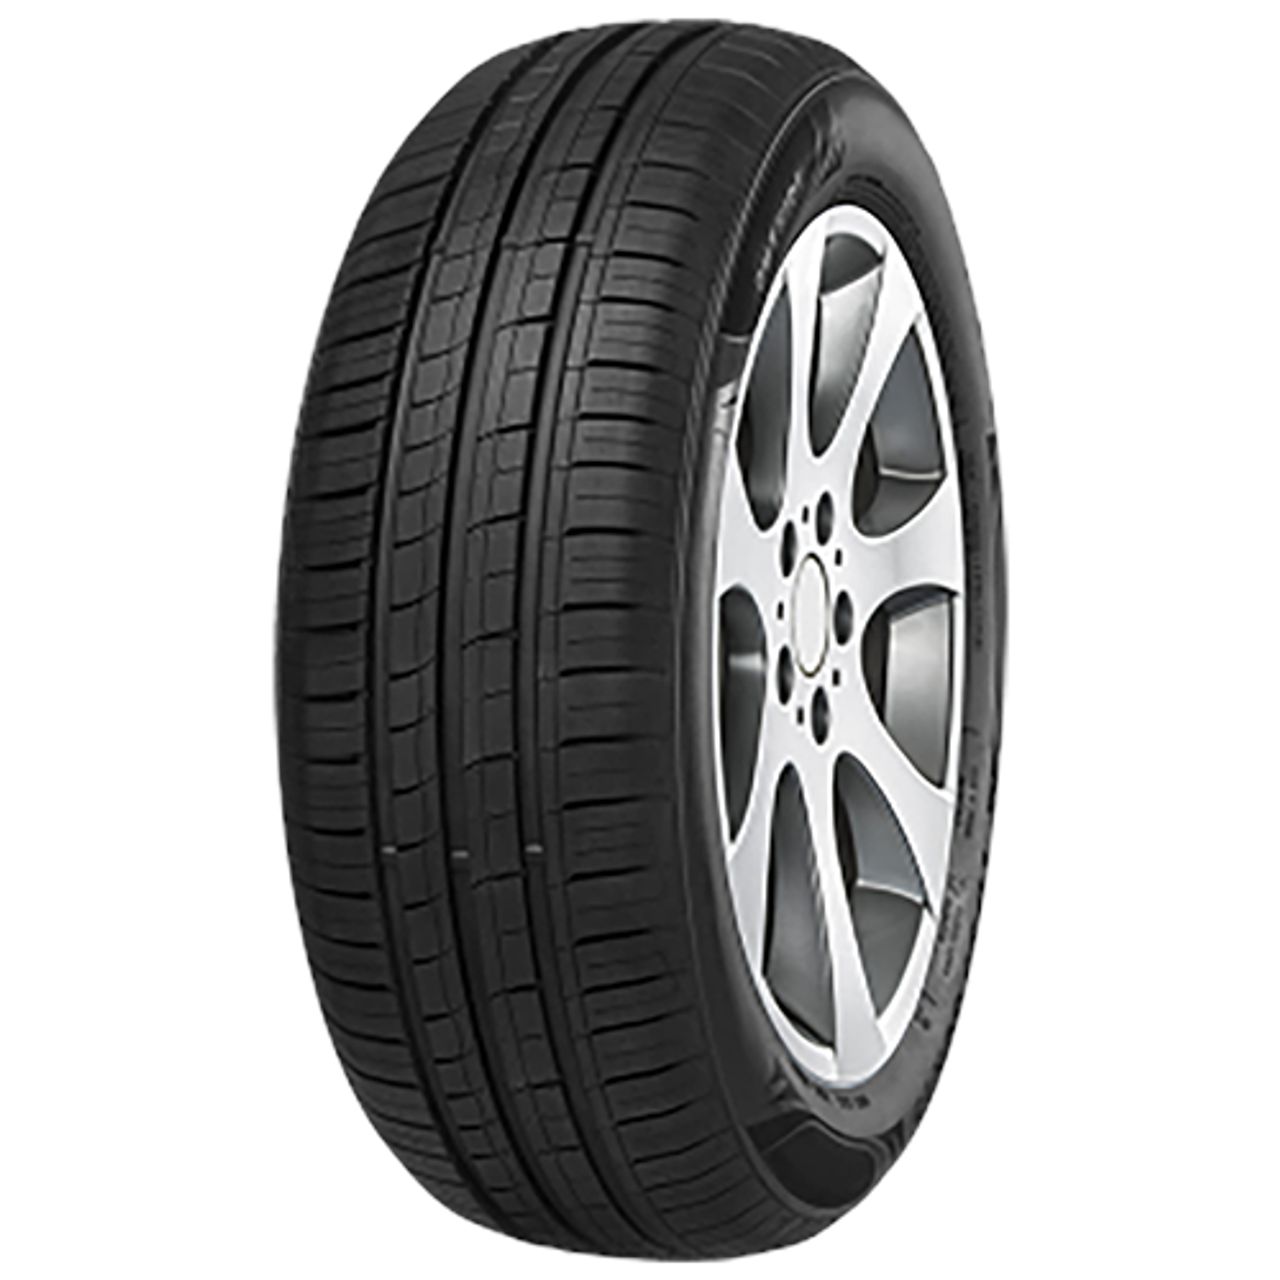 IMPERIAL ECODRIVER 4 195/70R15 97T BSW XL